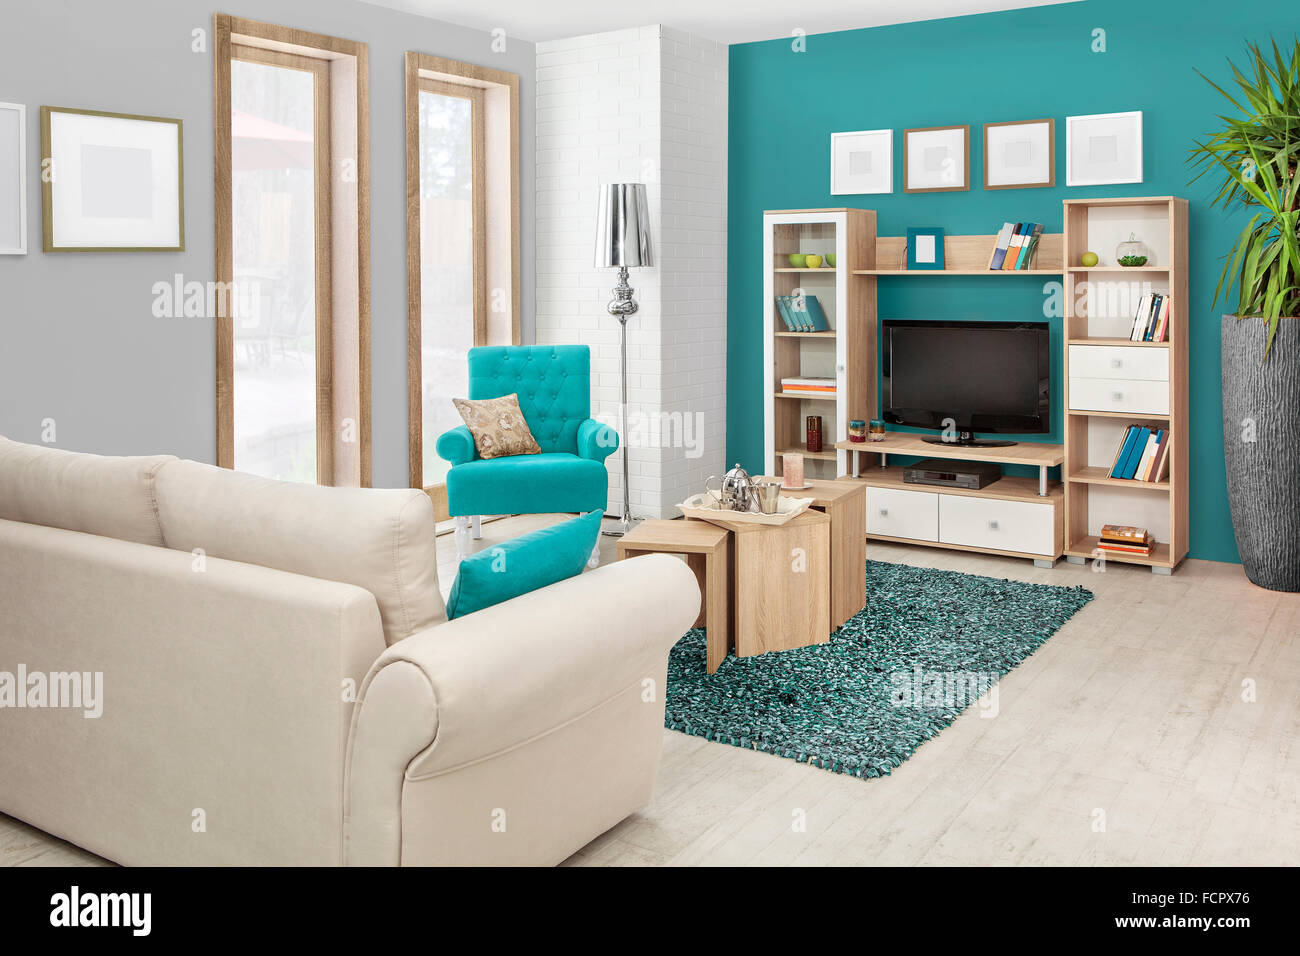 Interior of a modern living room in color Stock Photo